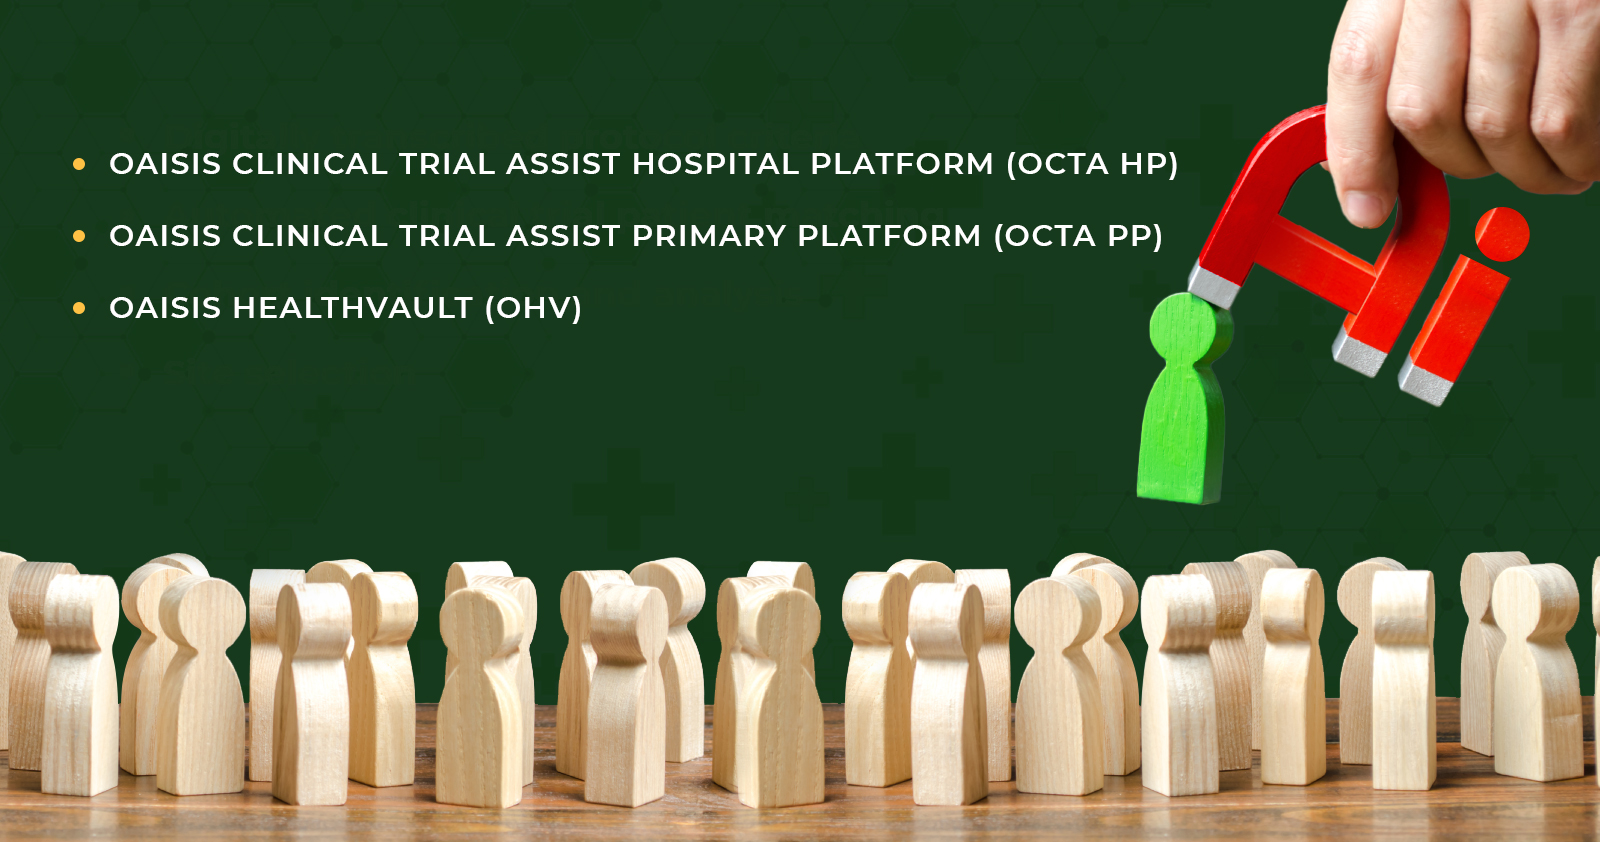 Oaisis Clinical Trial Assist